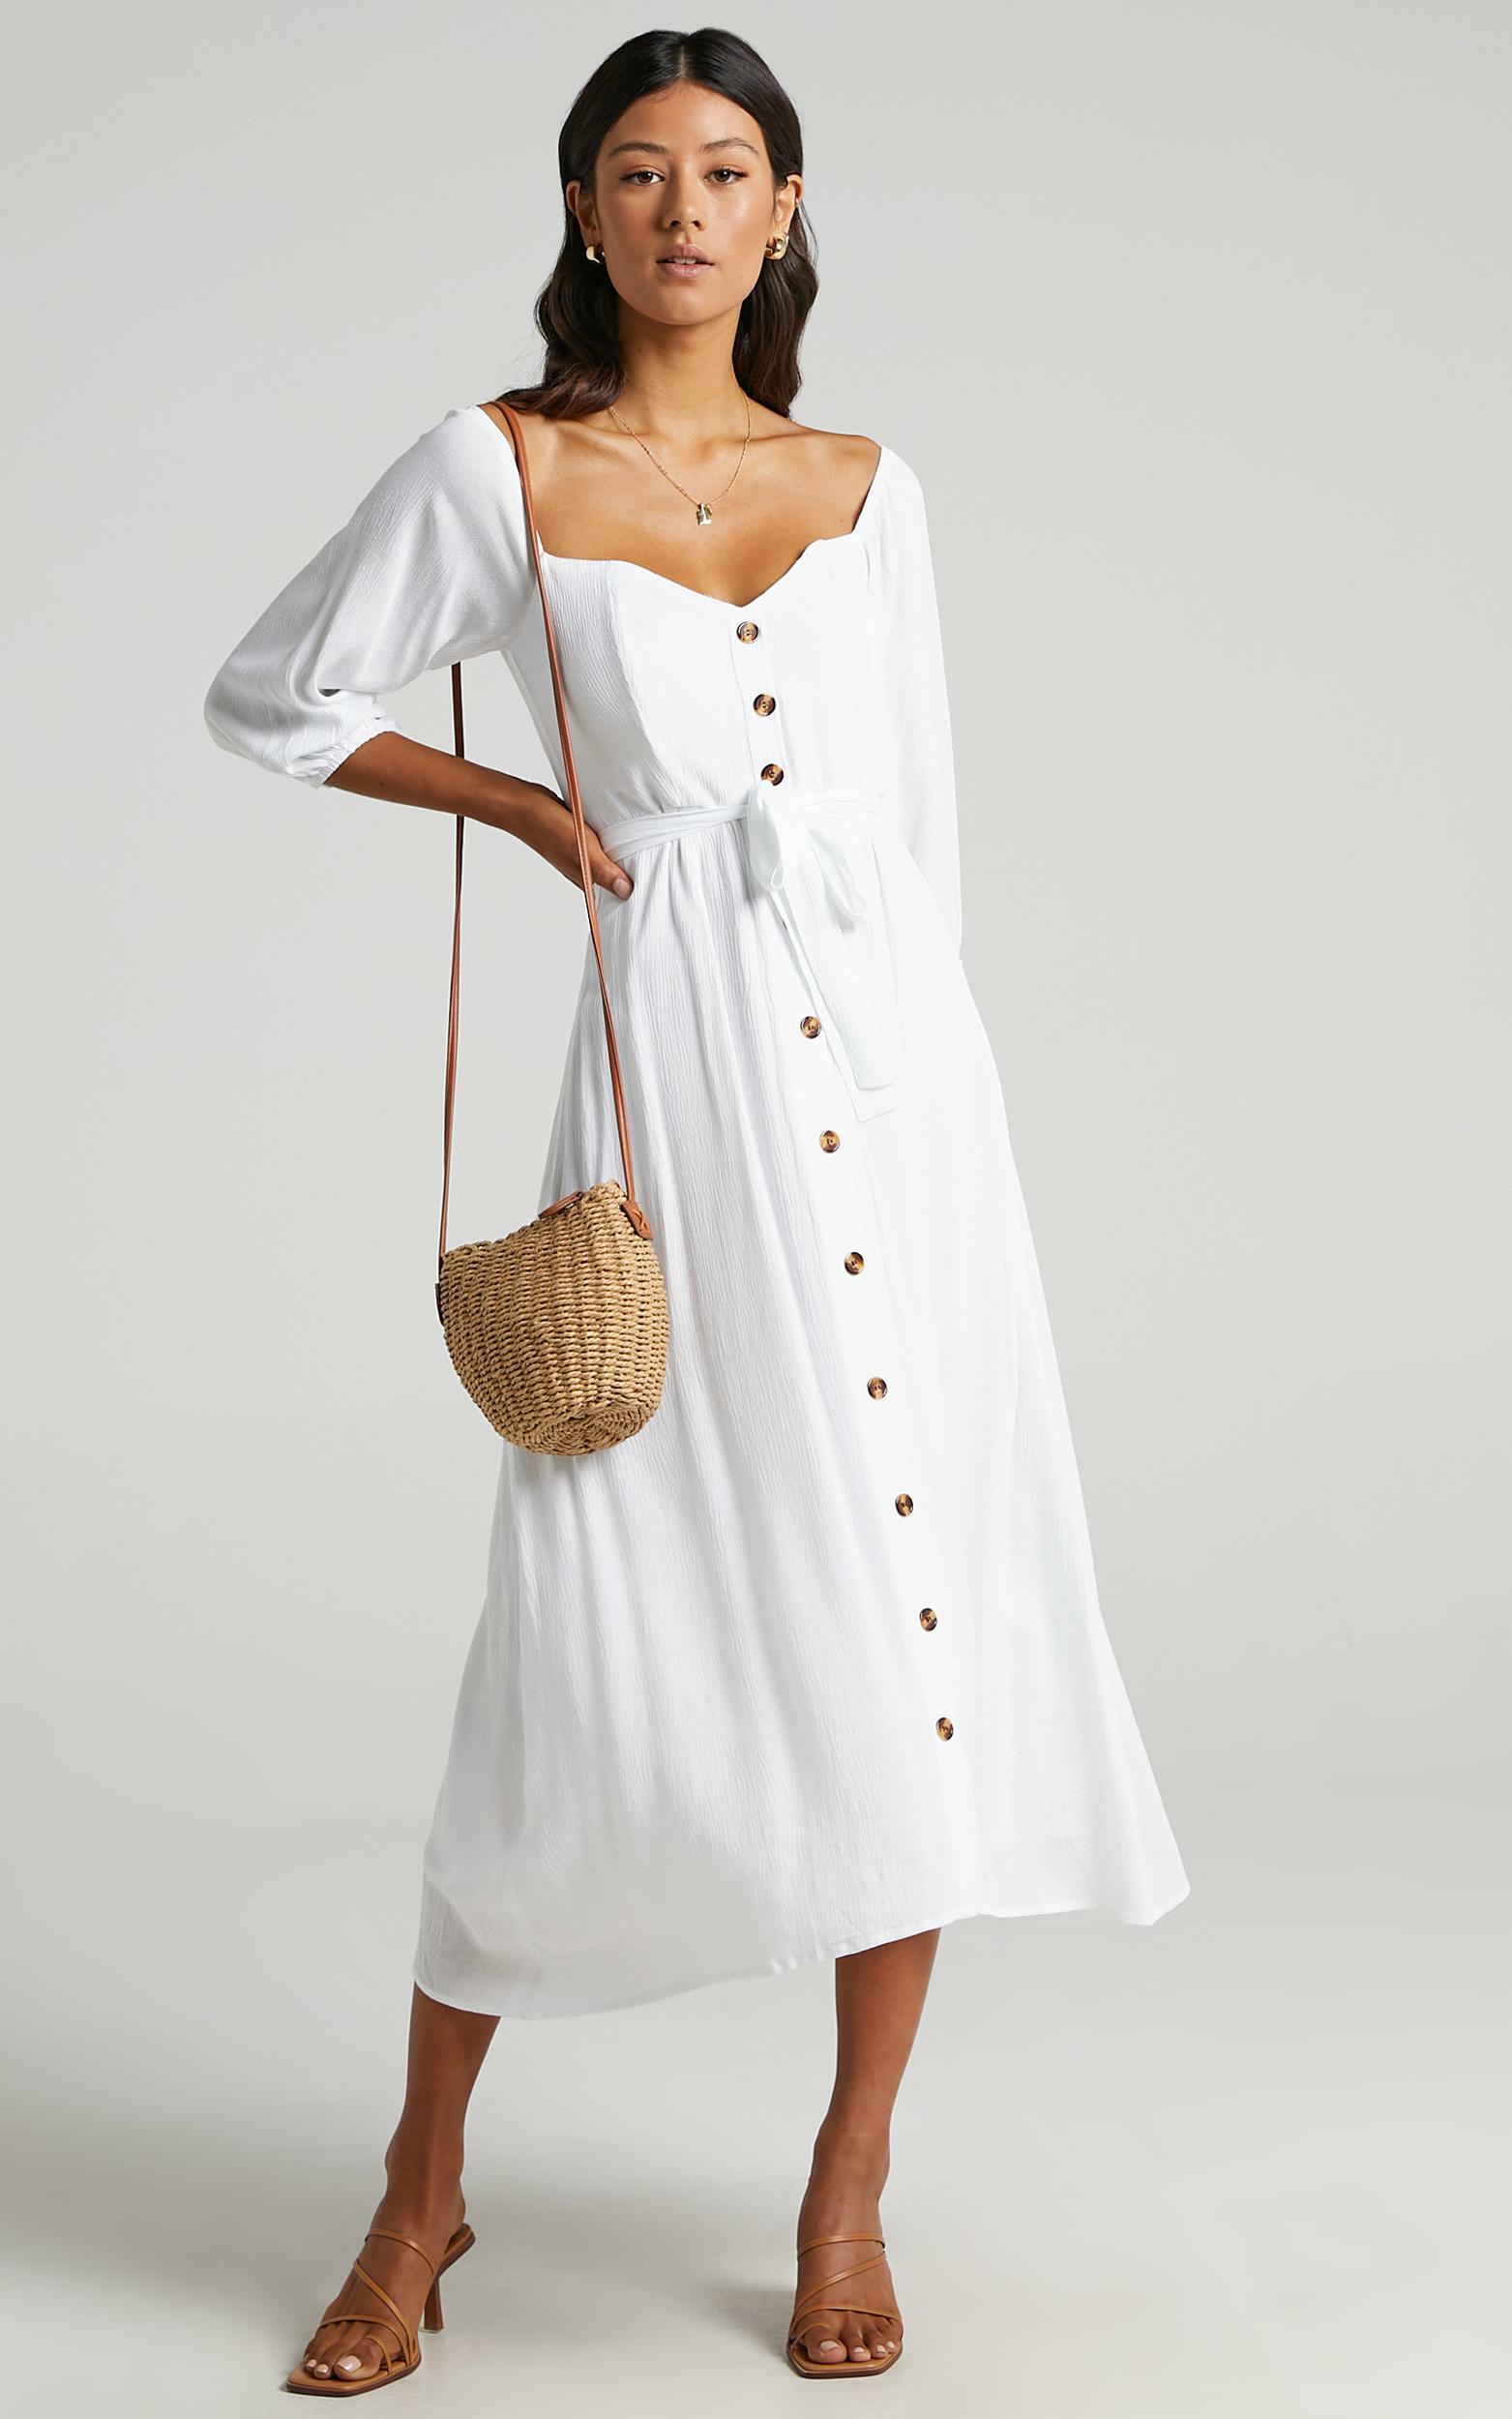 Sorrento Dreaming Dress in White Linen Look - 04, WHT5, hi-res image number null